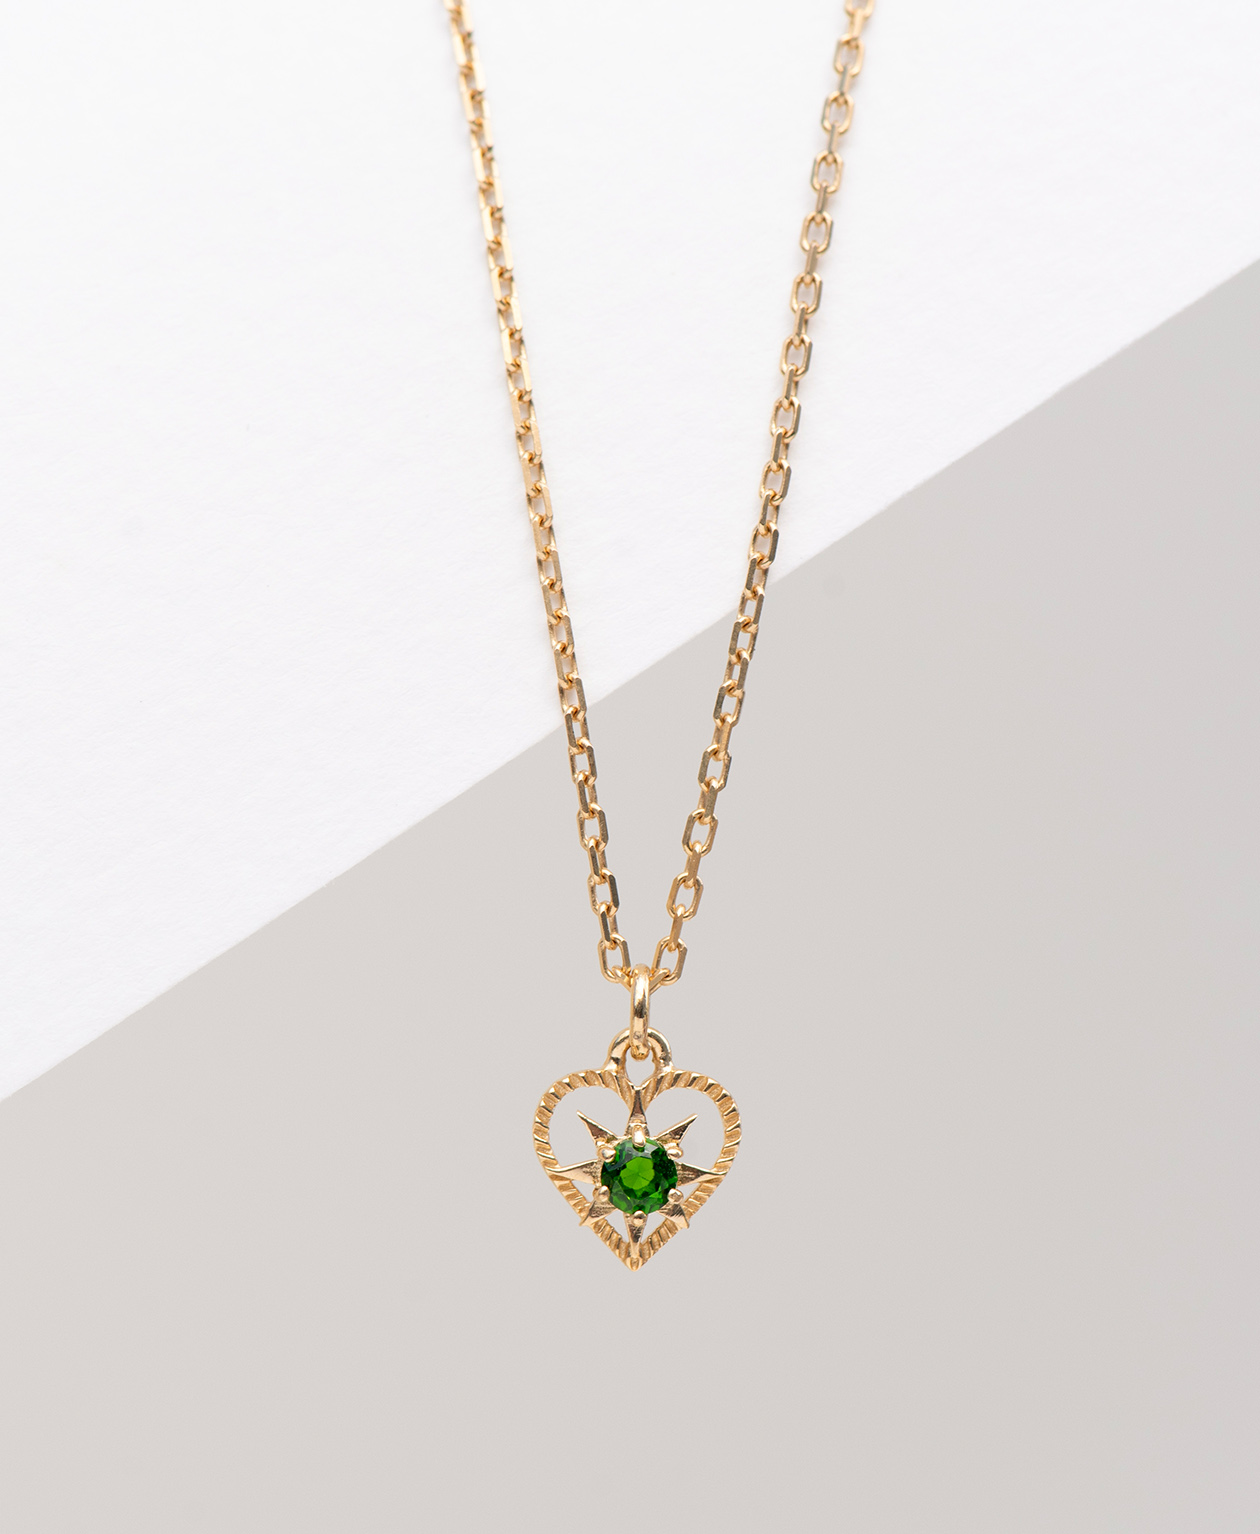 Zoe and Morgan  Kind Heart Gold Chrome Diopside Necklace